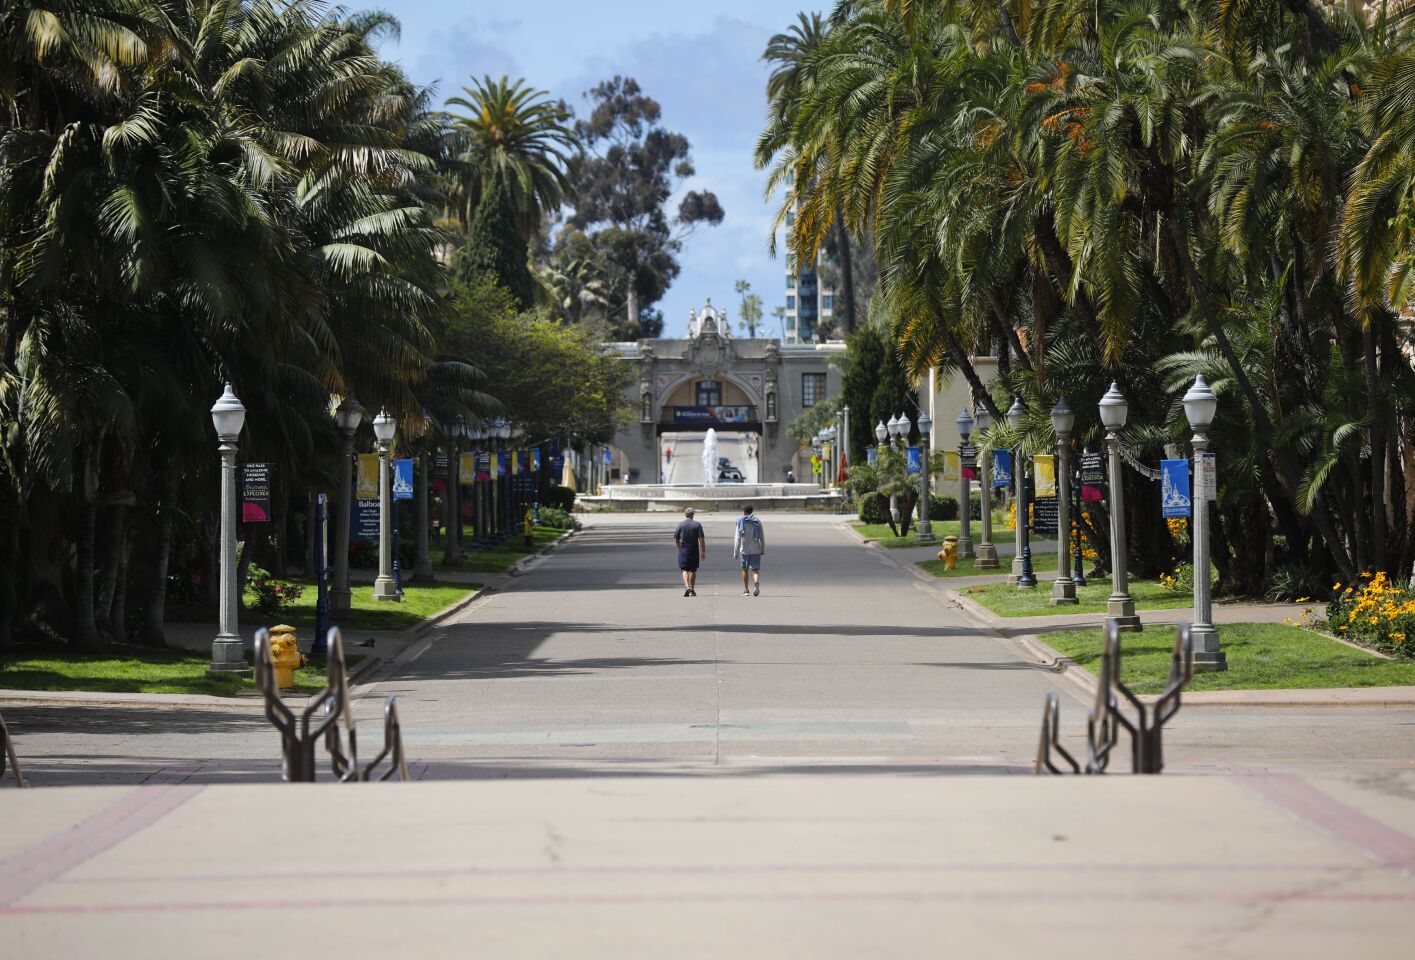 People walk down El Prado in Balboa Park on March 24, 2020. San Diego Mayor Kevin Faulconer closed all beaches and parks due to the coronavirus.